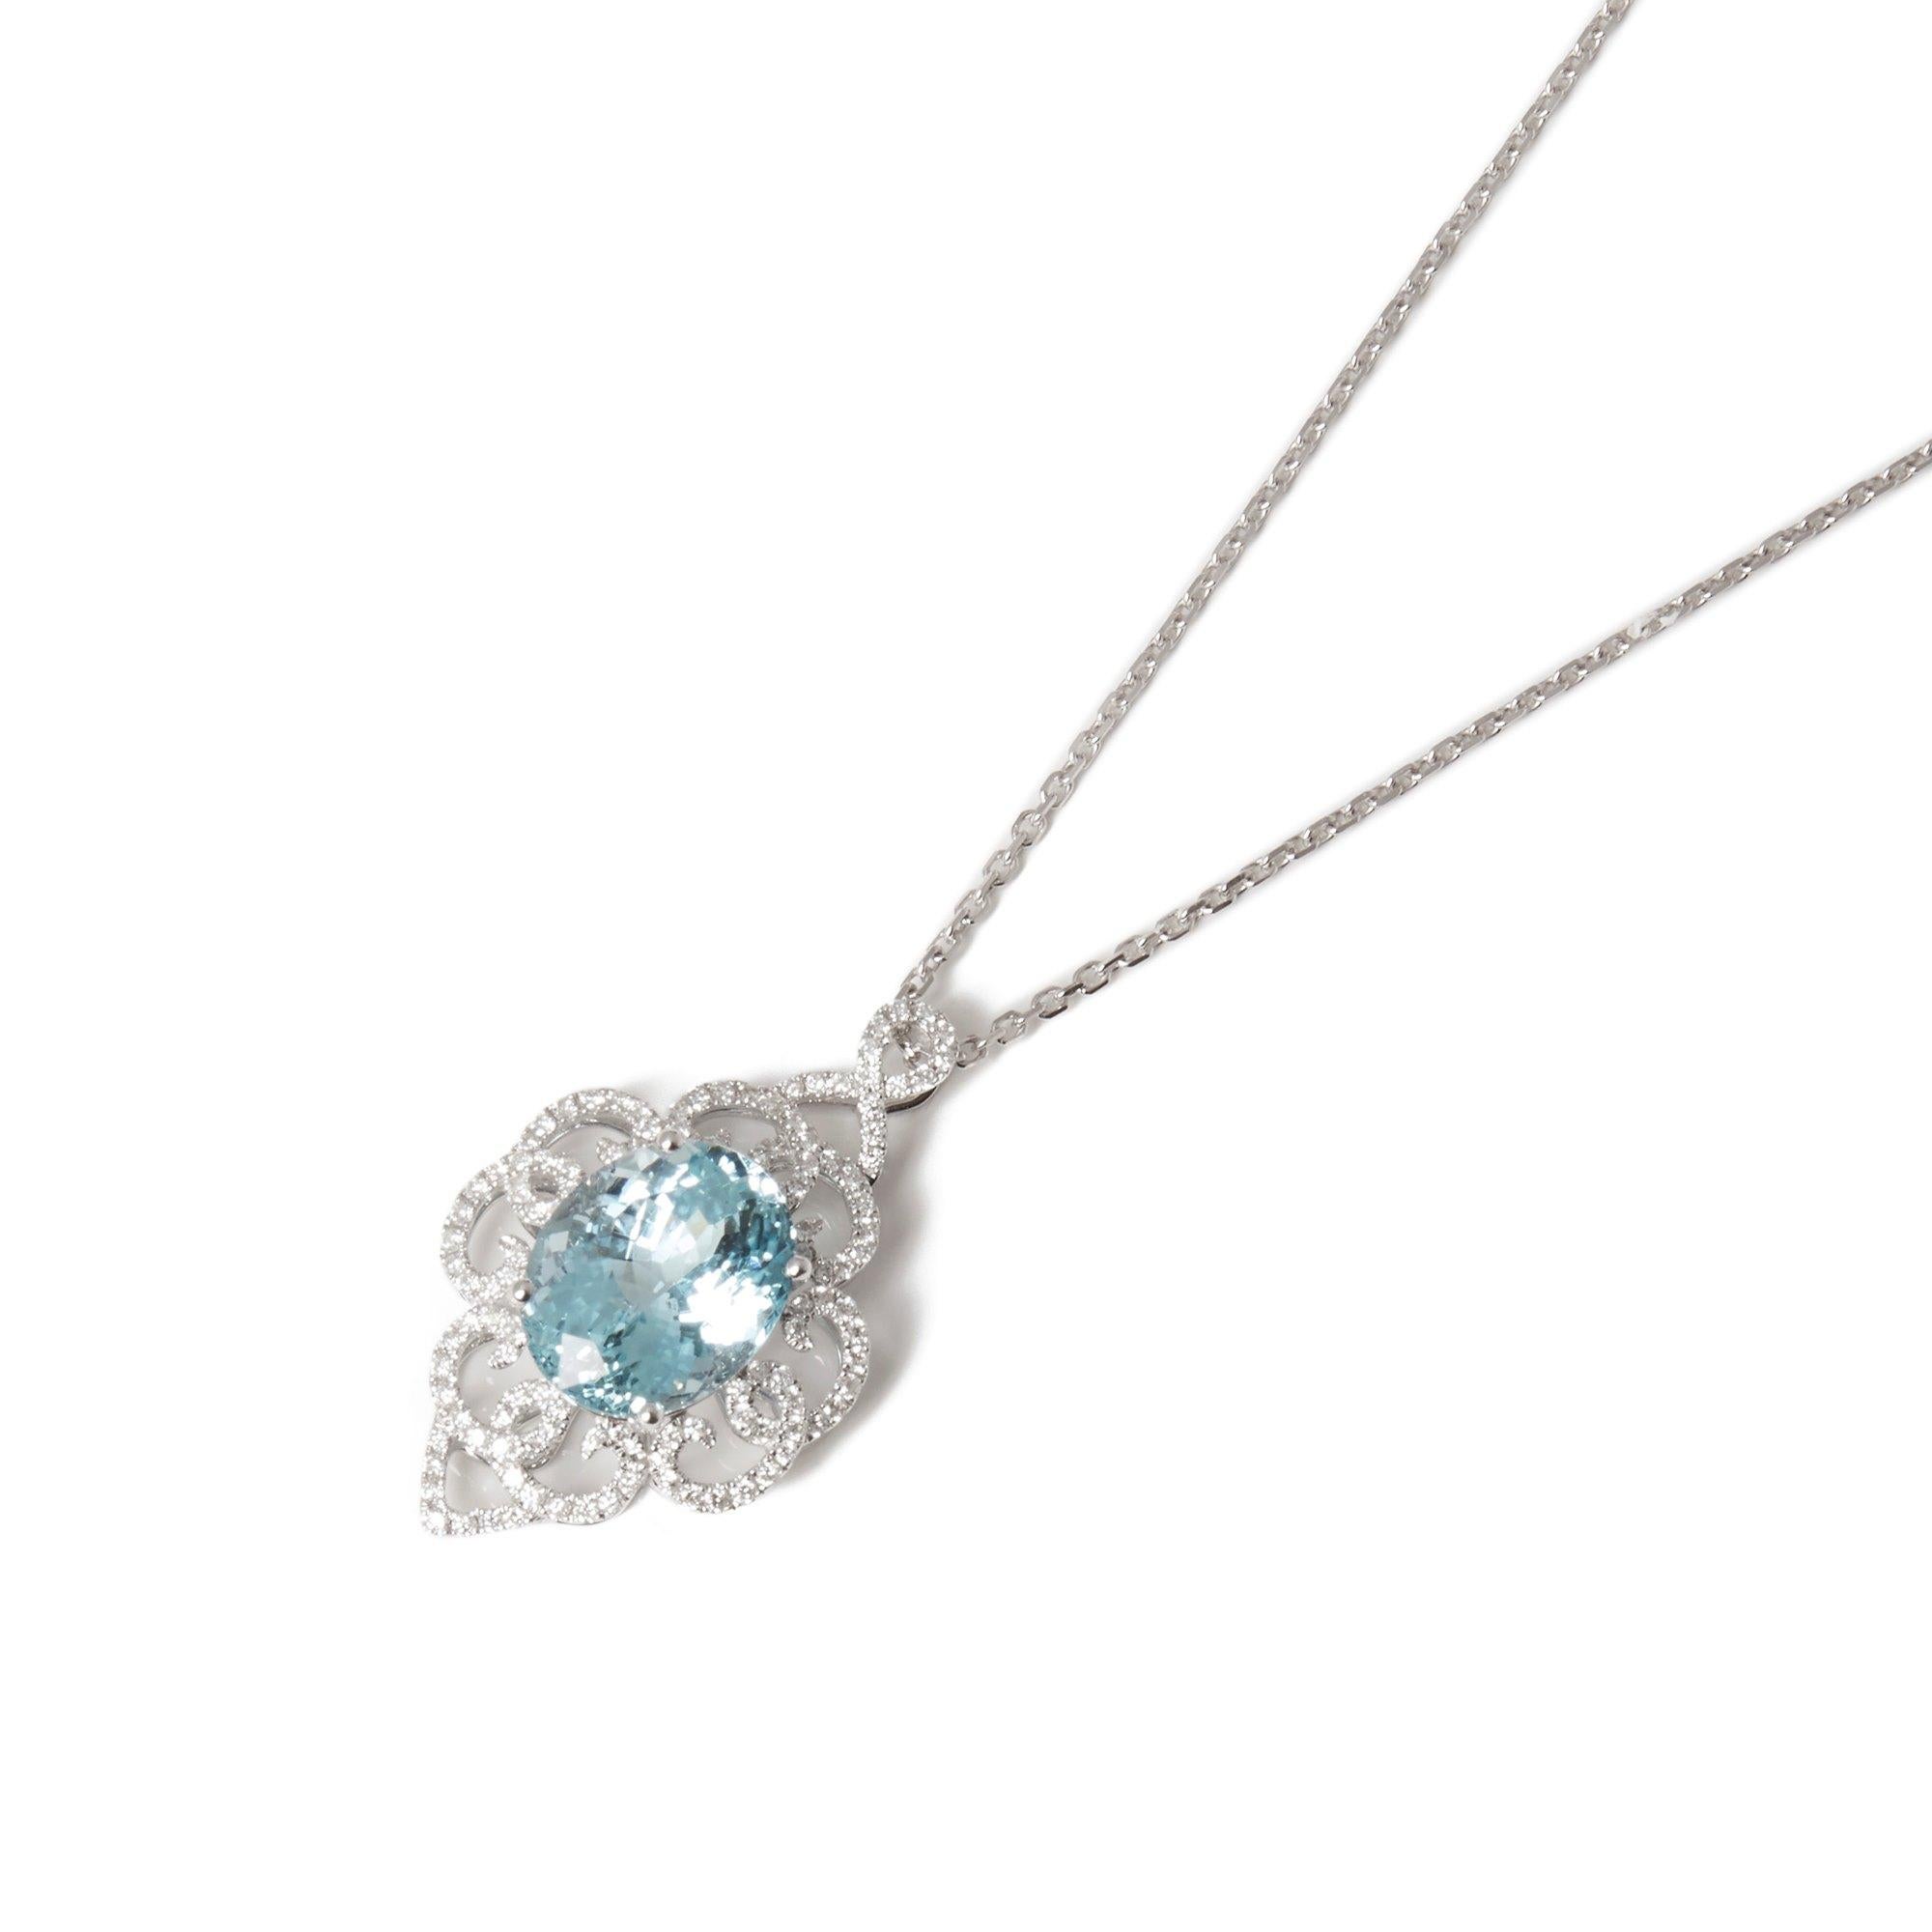 This Pendant Designed by David Jerome is from his Private Collection and features One Oval Cut Aquamarine Totalling 6.75cts Sourced in Brazil. Set with Round Brilliant Cut Diamonds Totalling 0.63cts Mounted in an 18k White Gold Setting. 

David